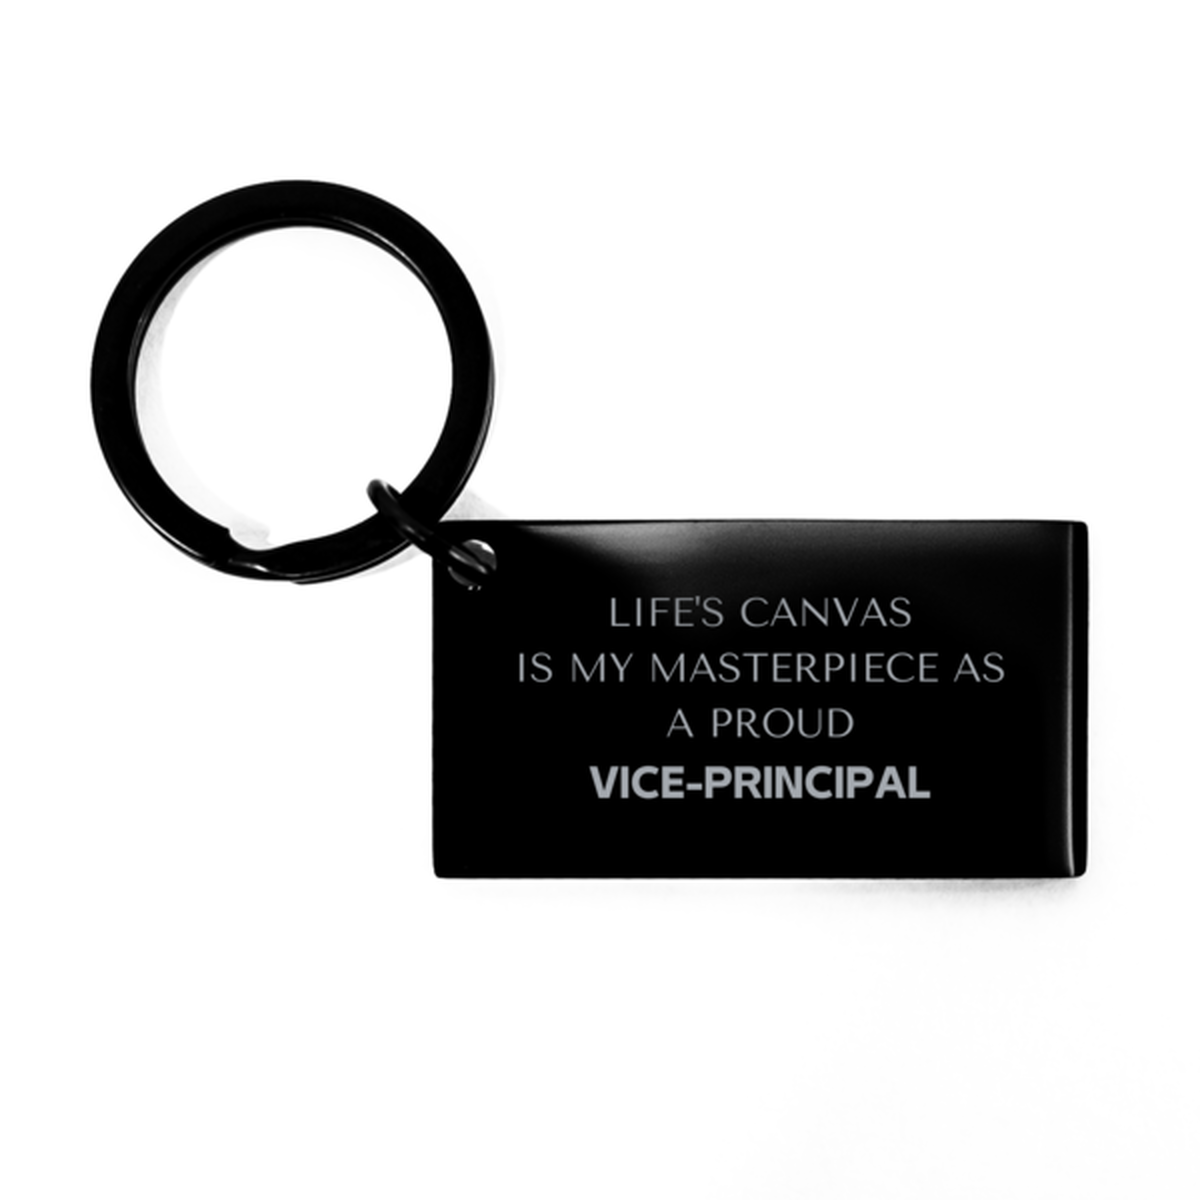 Proud Vice-principal Gifts, Life's canvas is my masterpiece, Epic Birthday Christmas Unique Keychain For Vice-principal, Coworkers, Men, Women, Friends